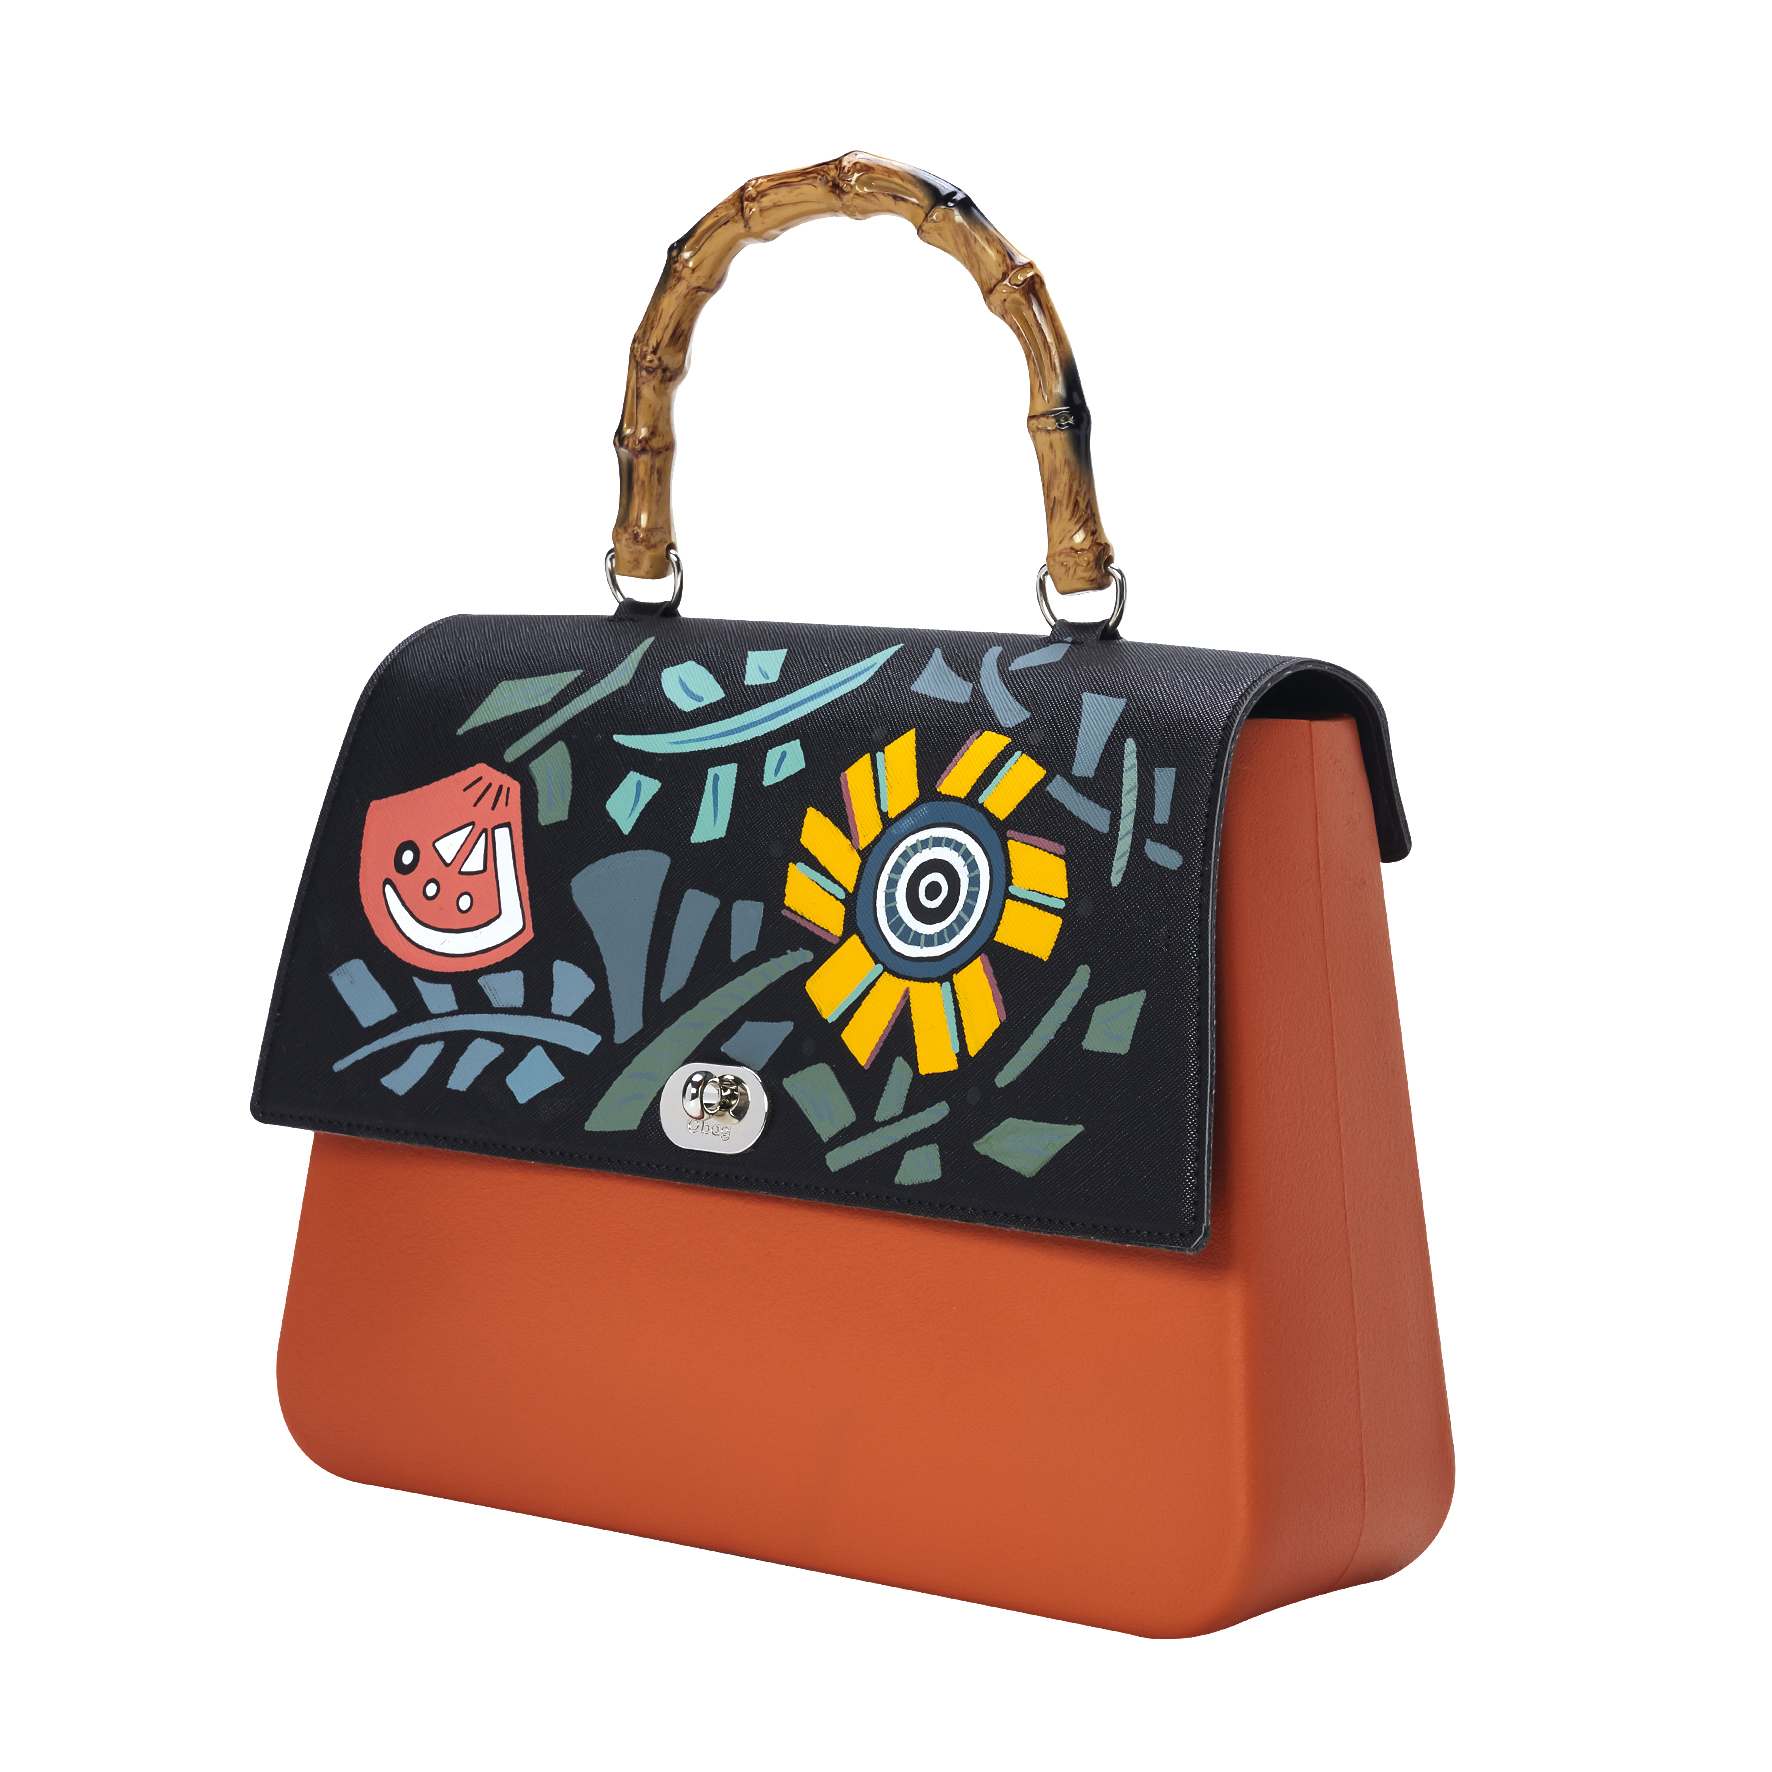 O Bag Queen Brick with Tangerine Print Flap & Bamboo Handle